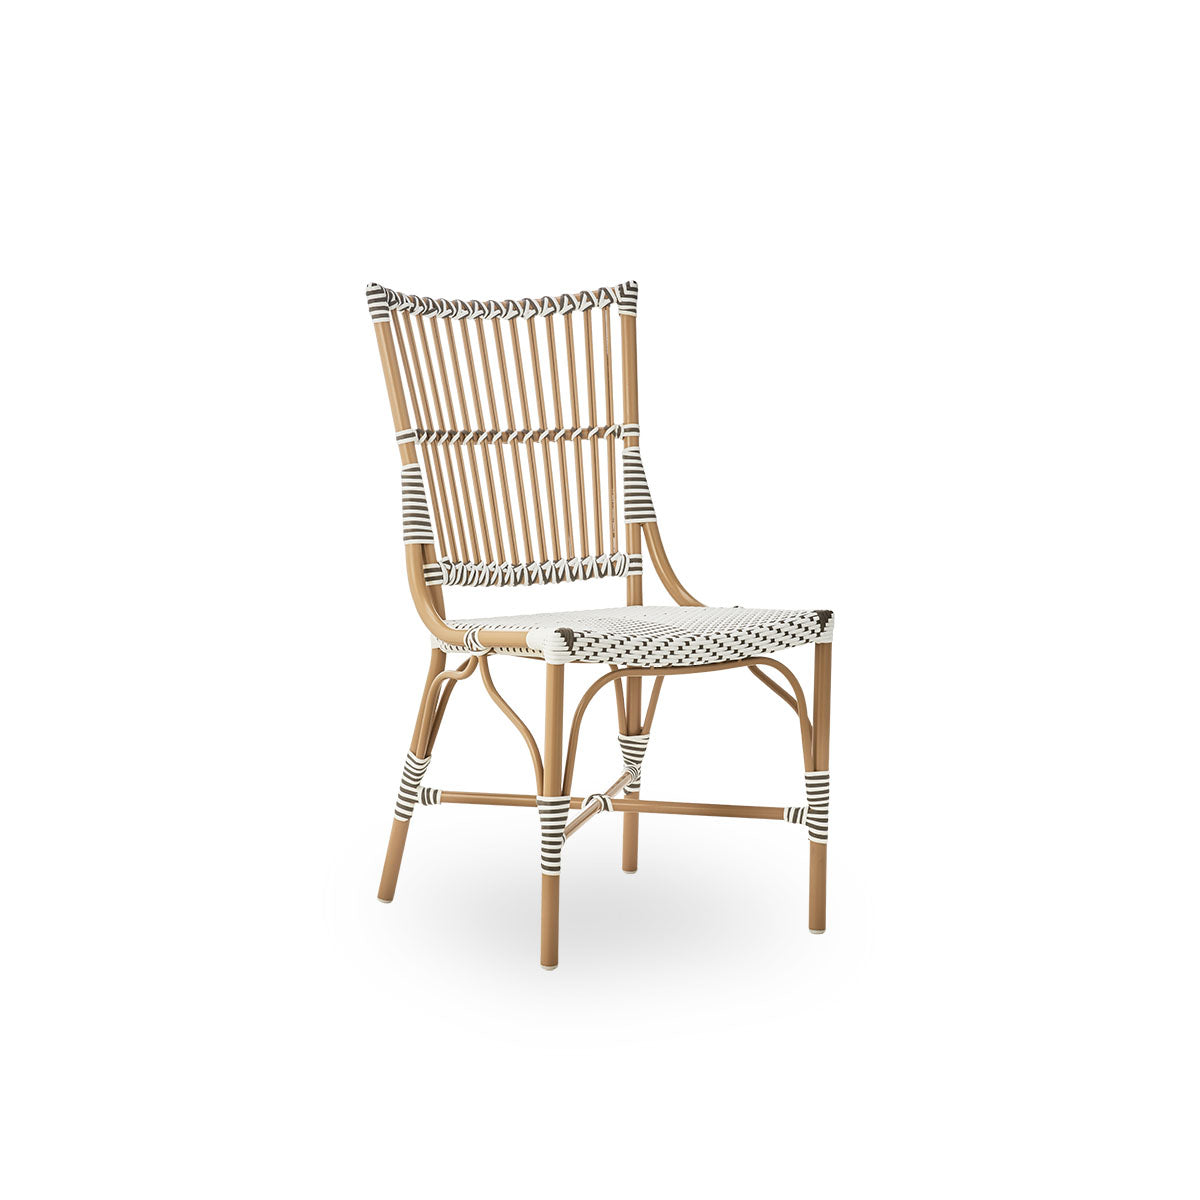 Monique Exterior Dining Chair | Seat cushion by Sika